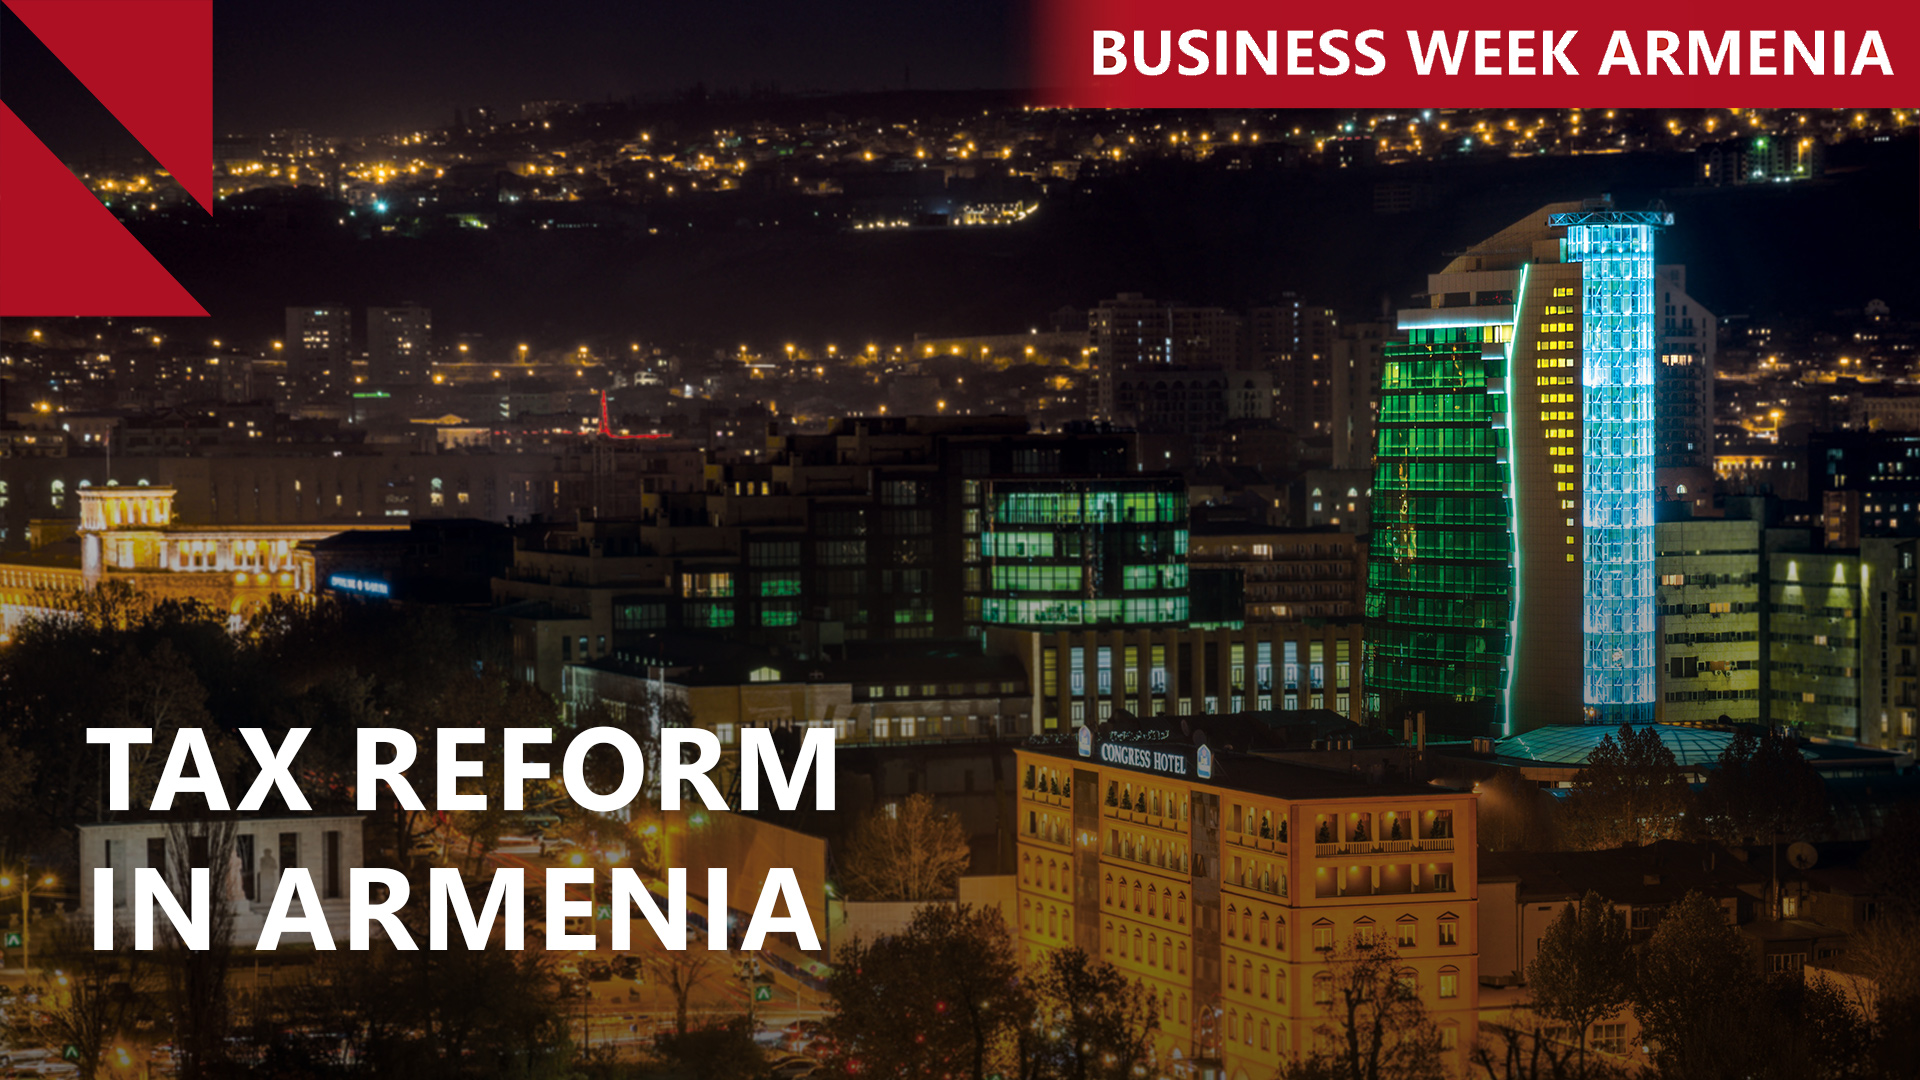 Armenia considering raising taxes on small businesses: THIS WEEK IN BUSINESS